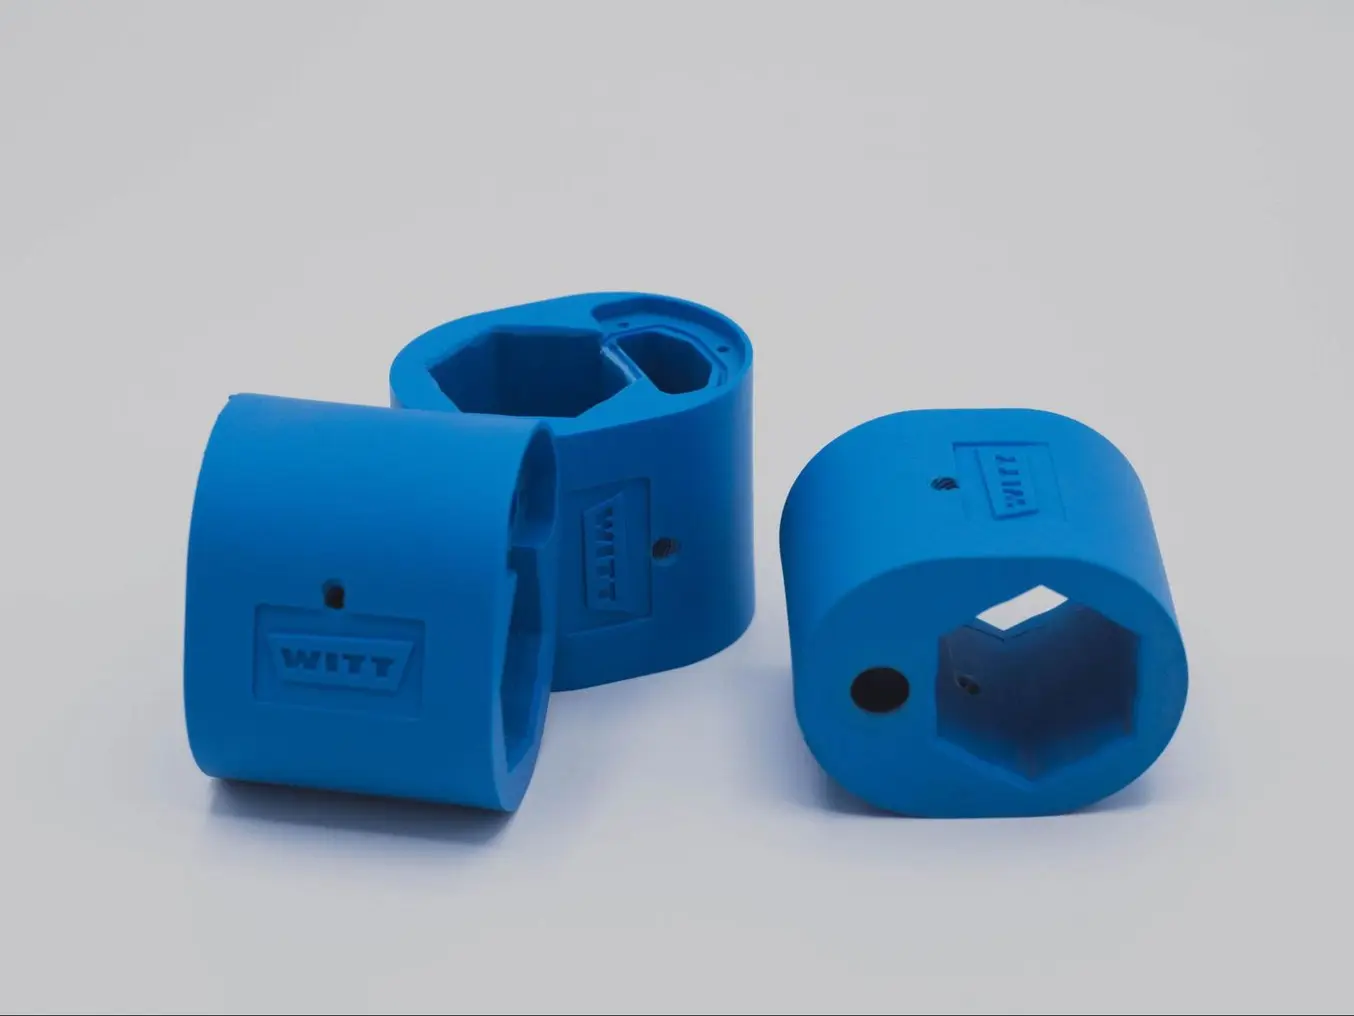 Housing for Witt Gasetechnik safety valves produced with silicone molding and SLA 3D printed master models.